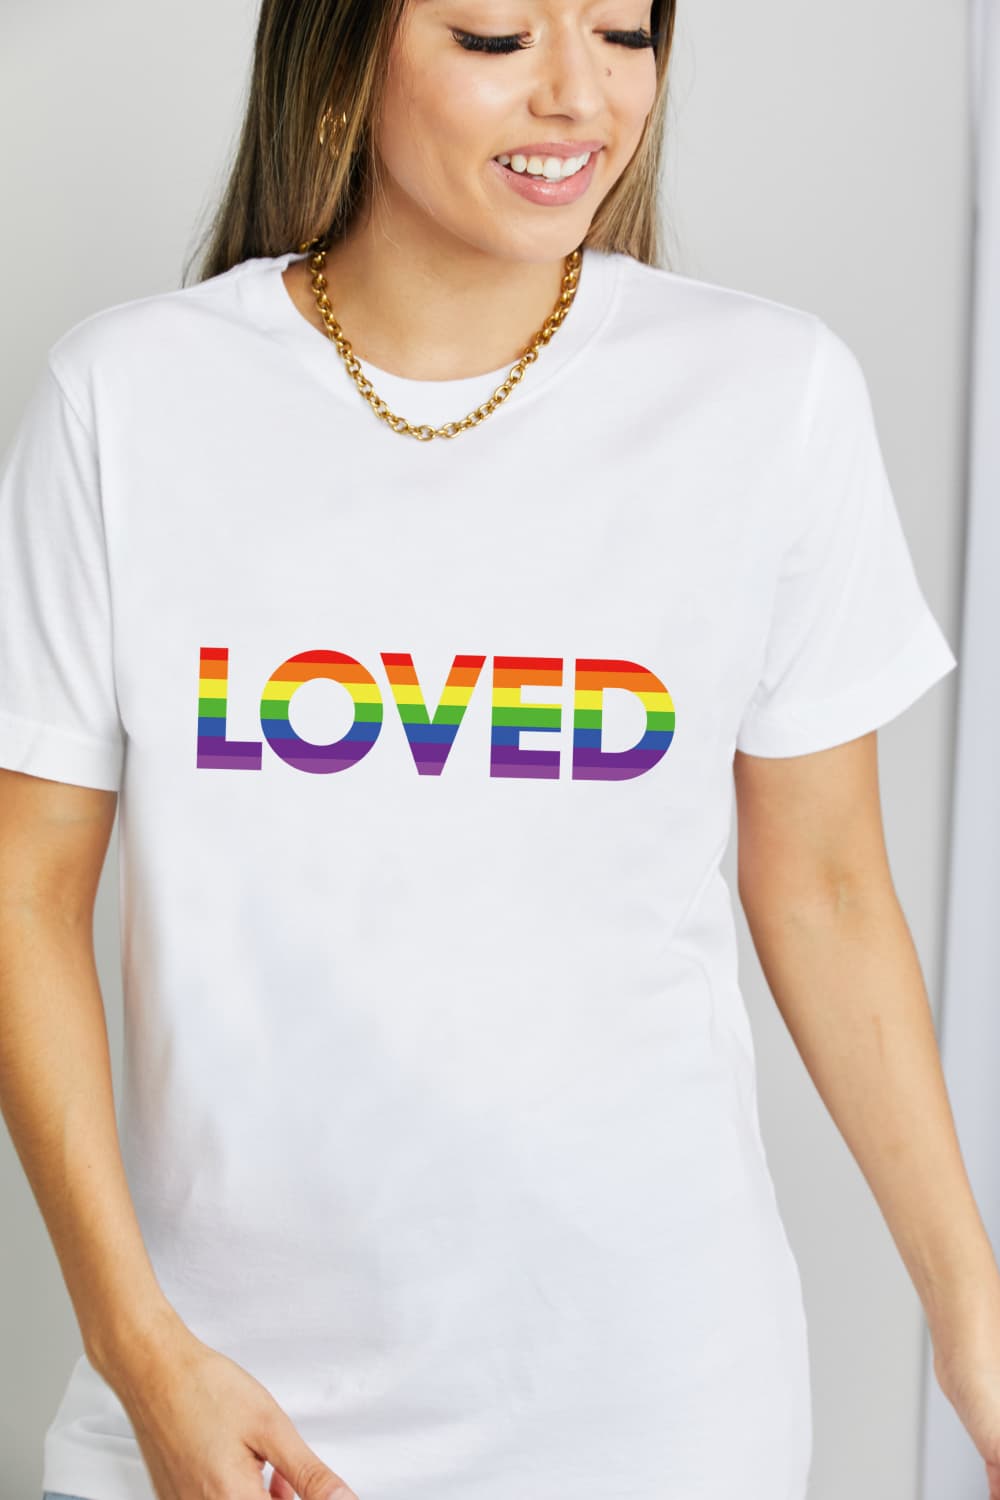 Simply Love, LOVED Graphic Cotton T-Shirt In White